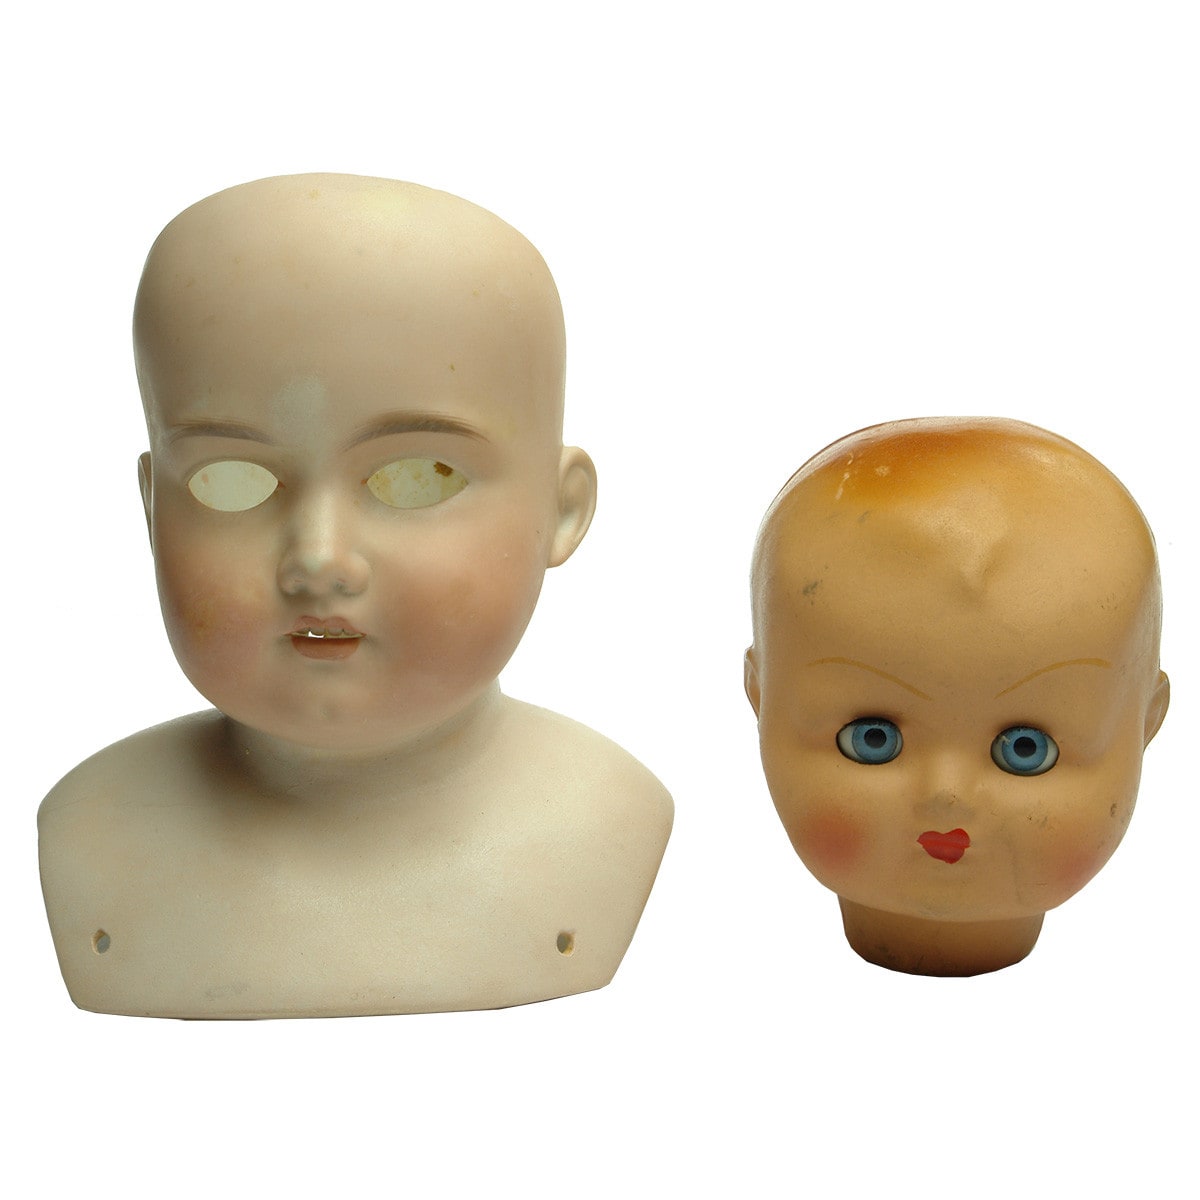 Dolls. Large shouldered bisque doll's head and a large rubberoid or celluloid doll's head.